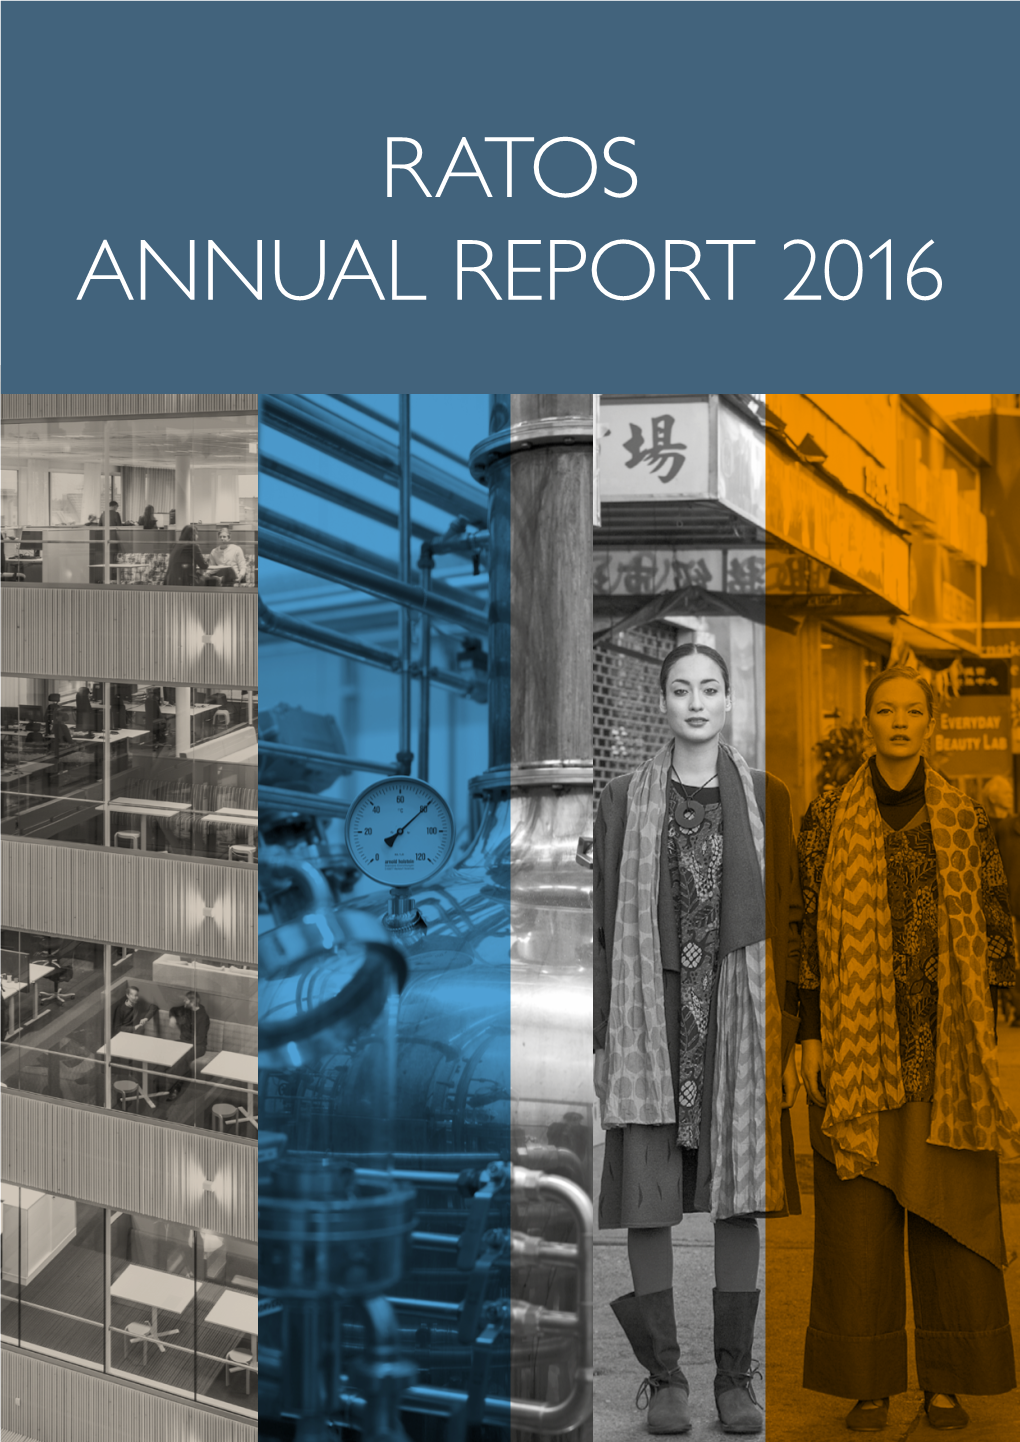 ANNUAL REPORT 2016 Contents